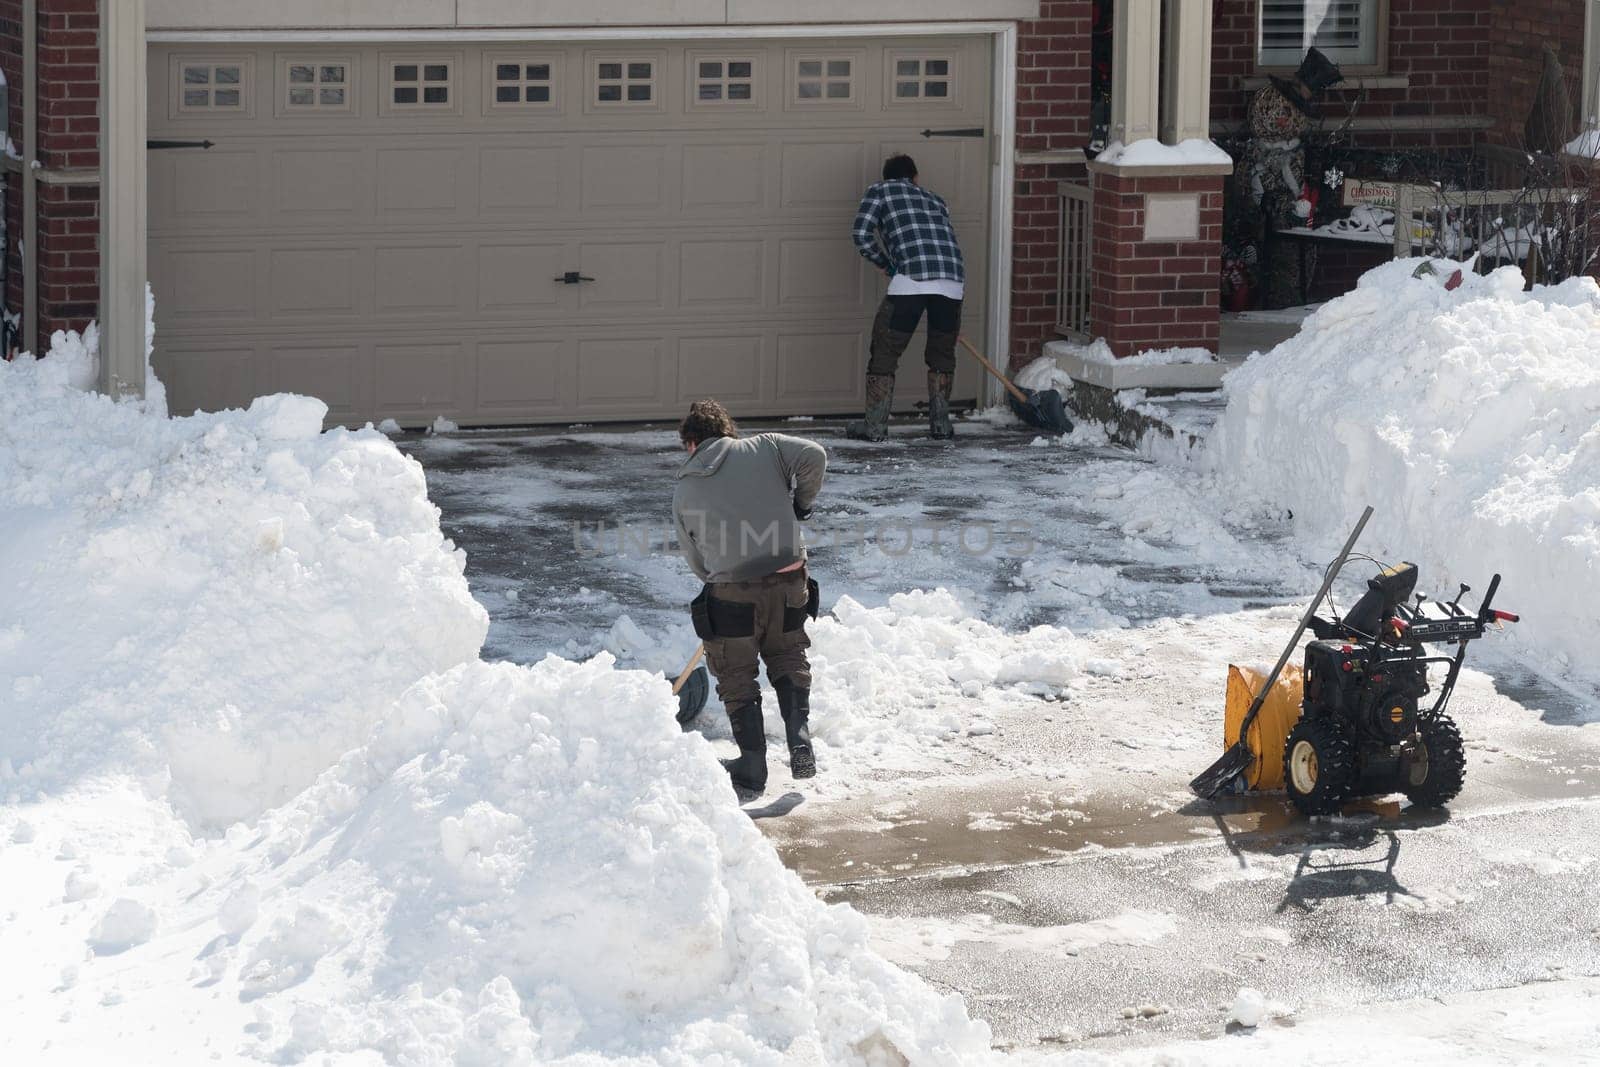 Two young guys finish clearing snow in front of the garage